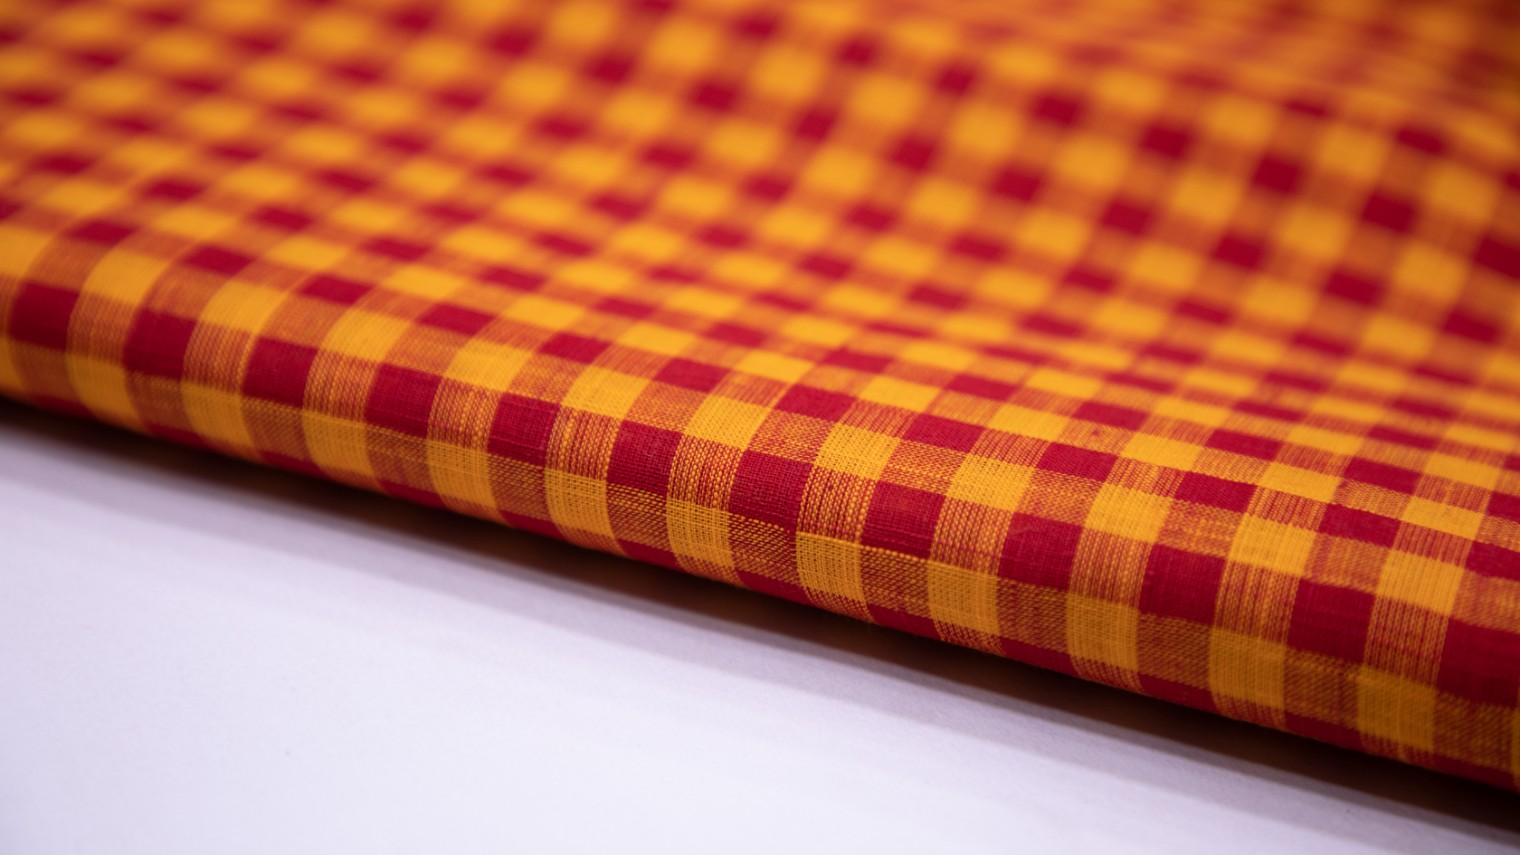 GOLDEN YELLOW & RED COLOR SOUTH COTTON HANDLOOM CRISS CROSS CHEX WEAVE FABRIC - 4222